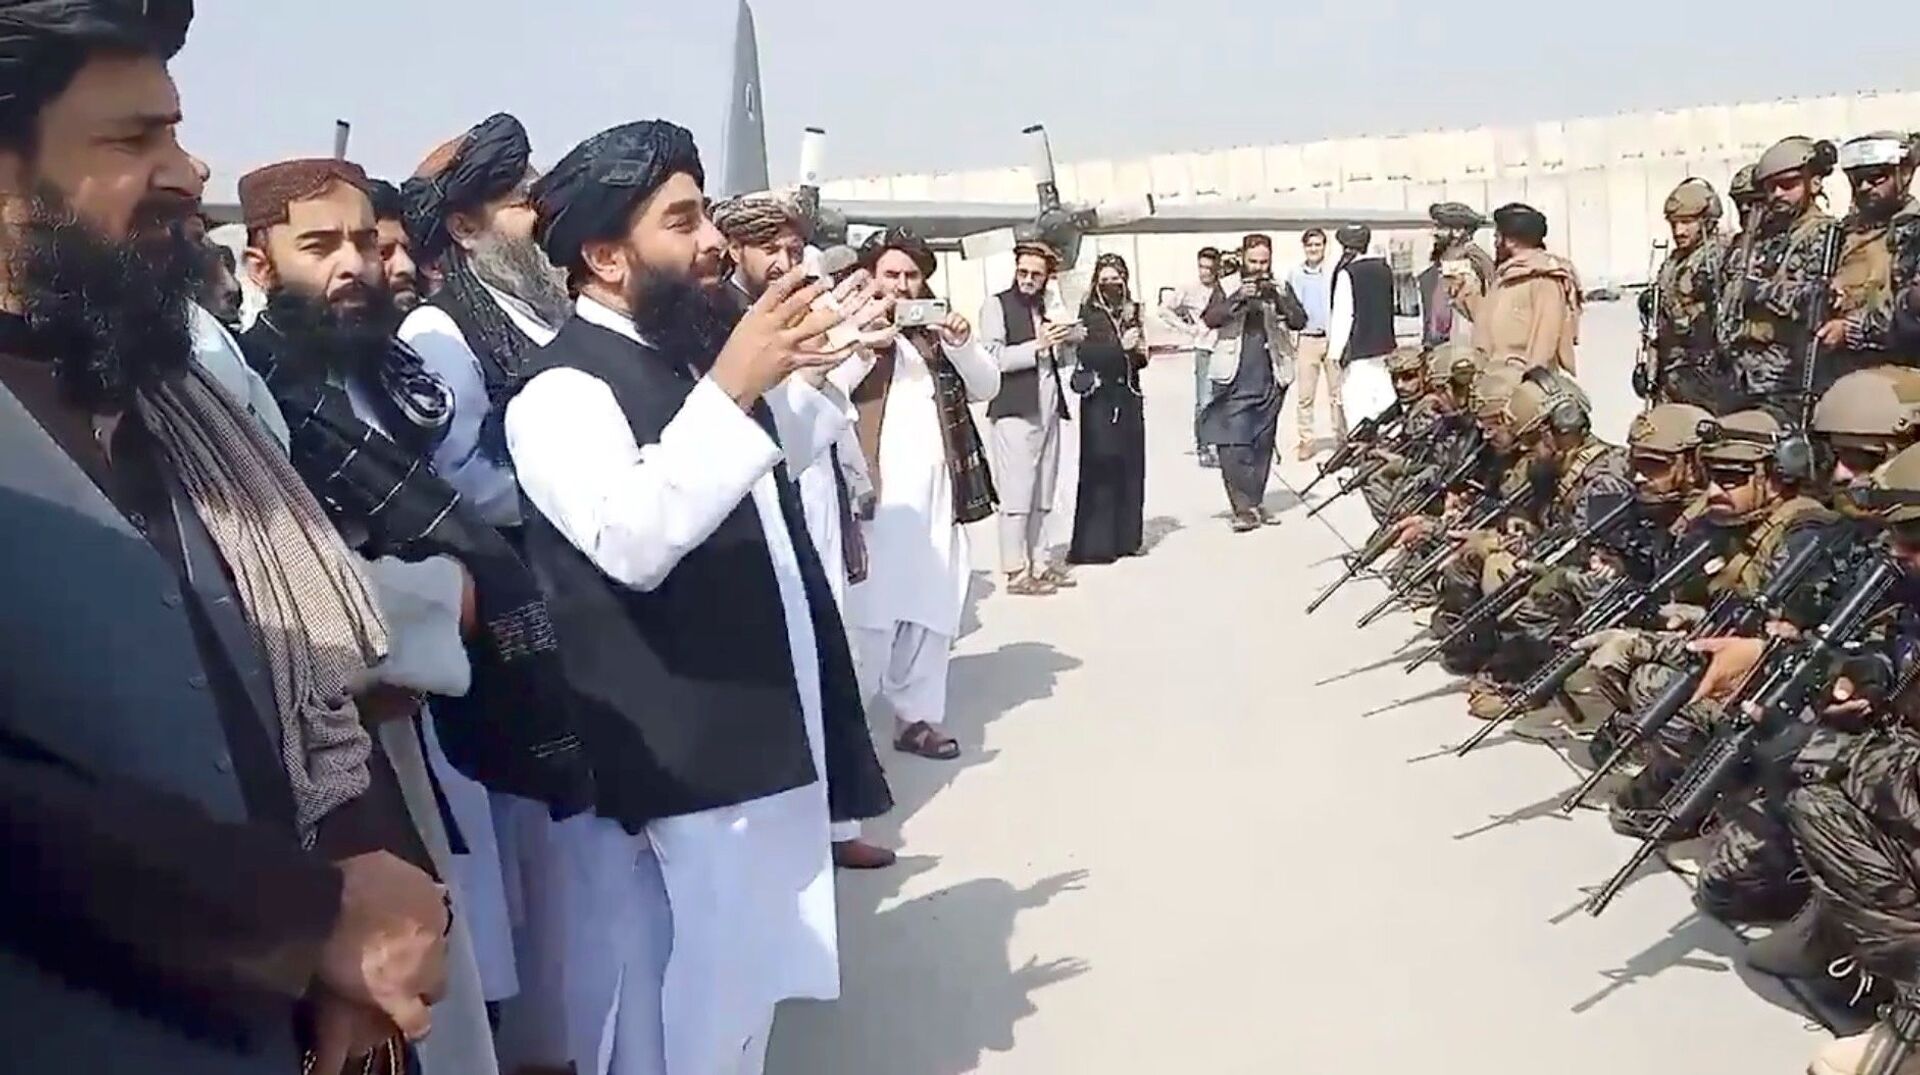 Taliban spokesman Zabihullah Mujahid speaks to Badri 313 military unit at Kabul's airport, Afghanistan August 31, 2021 in this still image obtained from a handout video.  Taliban/Handout via REUTERS   ATTENTION EDITORS - THIS IMAGE HAS BEEN SUPPLIED BY A THIRD PARTY. NO RESALES. NO ARCHIVES.  - Sputnik International, 1920, 07.09.2021